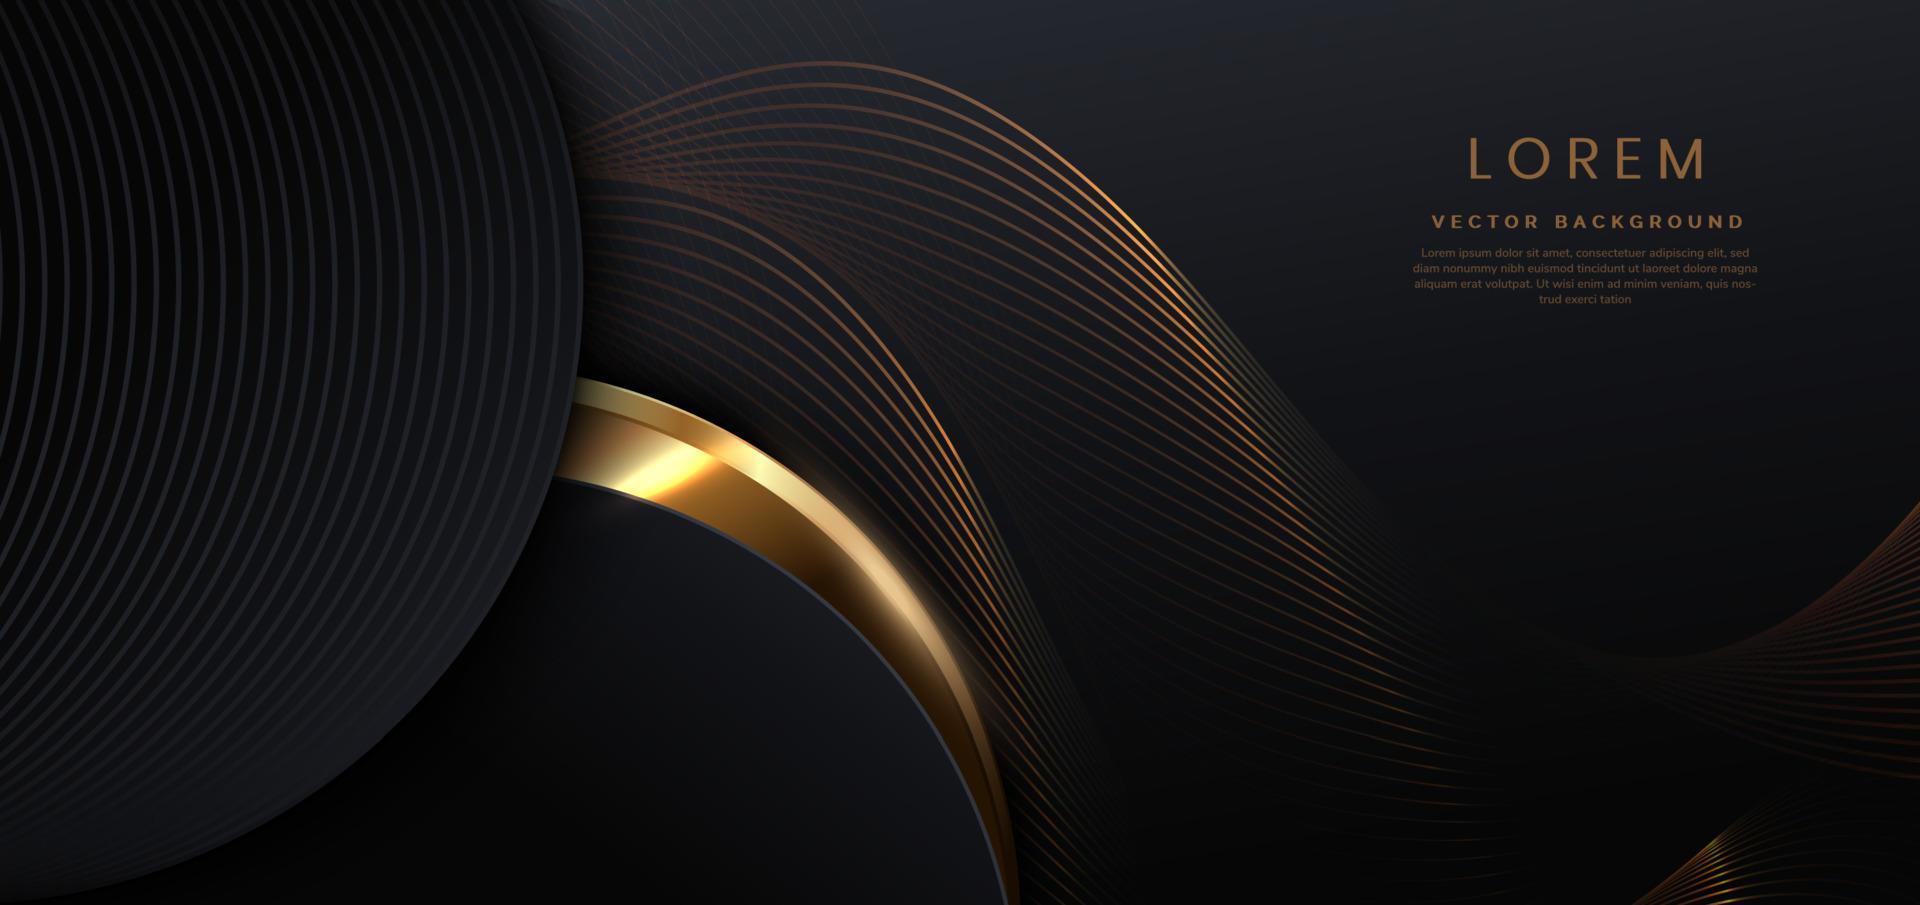 Abstact 3d luxury black curve with border golden curve lines elegant and lighting effect on black background. vector